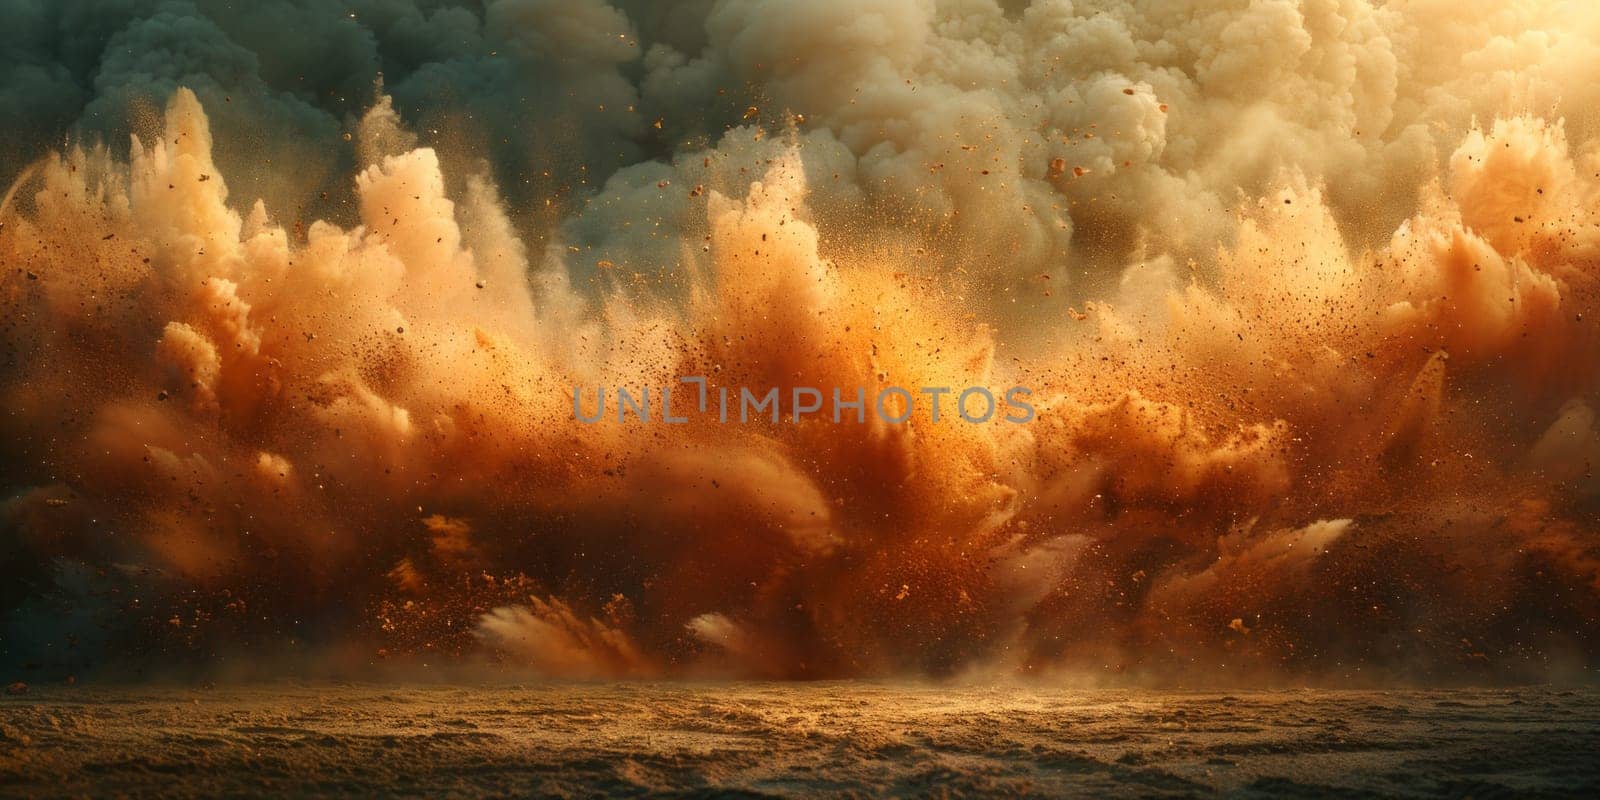 A massive explosion of smoke and dust billows up from the water, creating a mesmerizing scene of chaos and transformation by but_photo